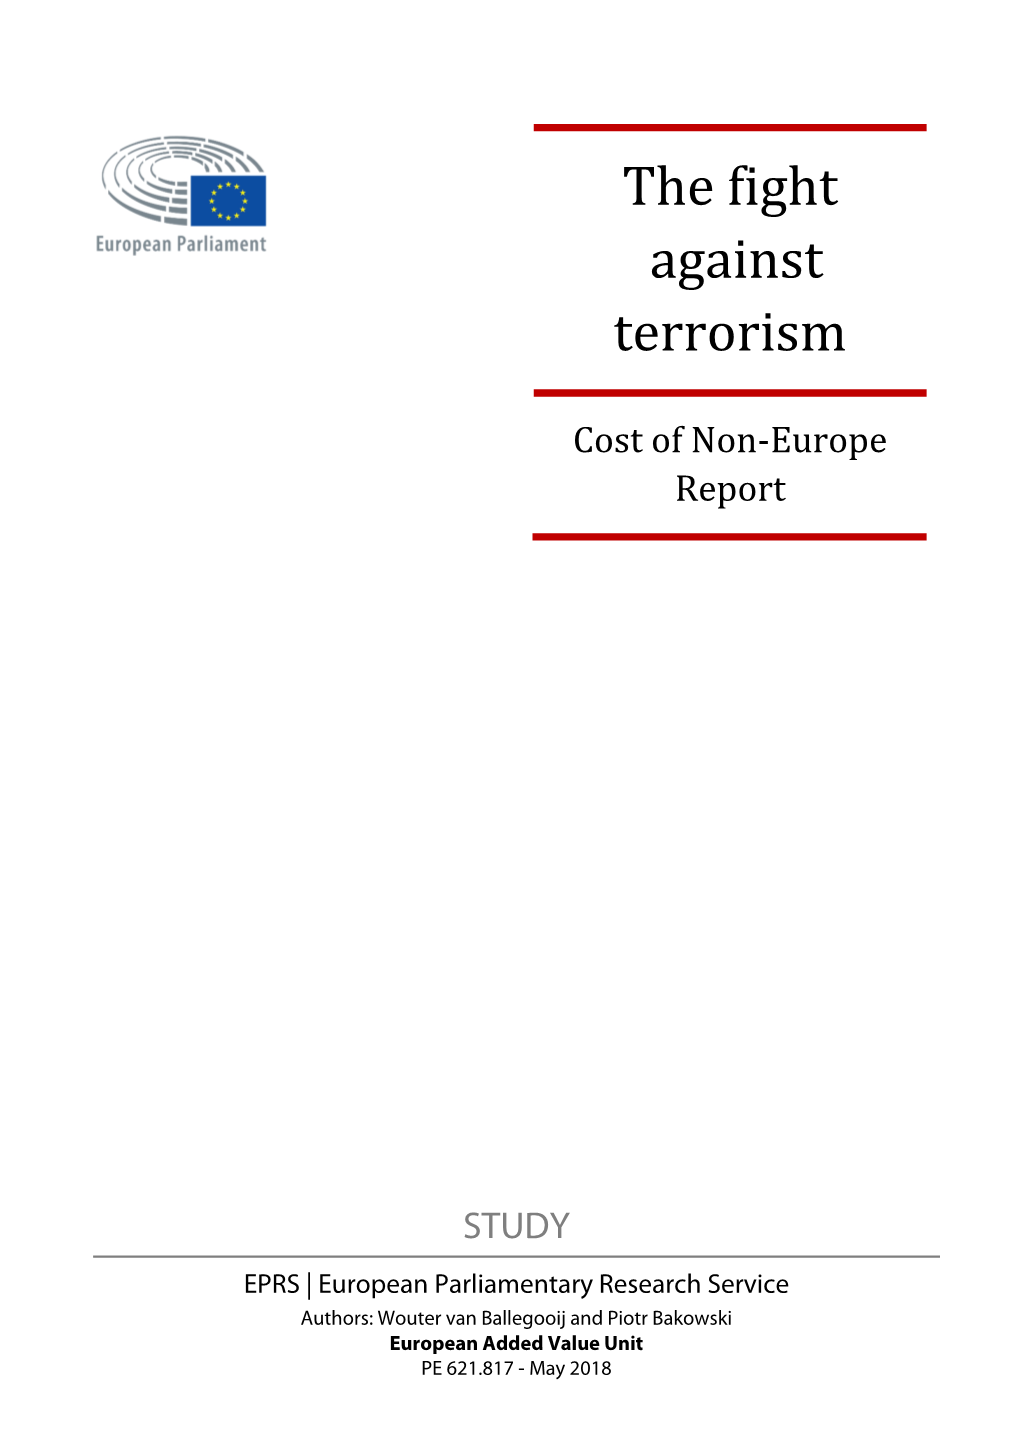 The Fight Against Terrorism Cost of Non-Europe Report